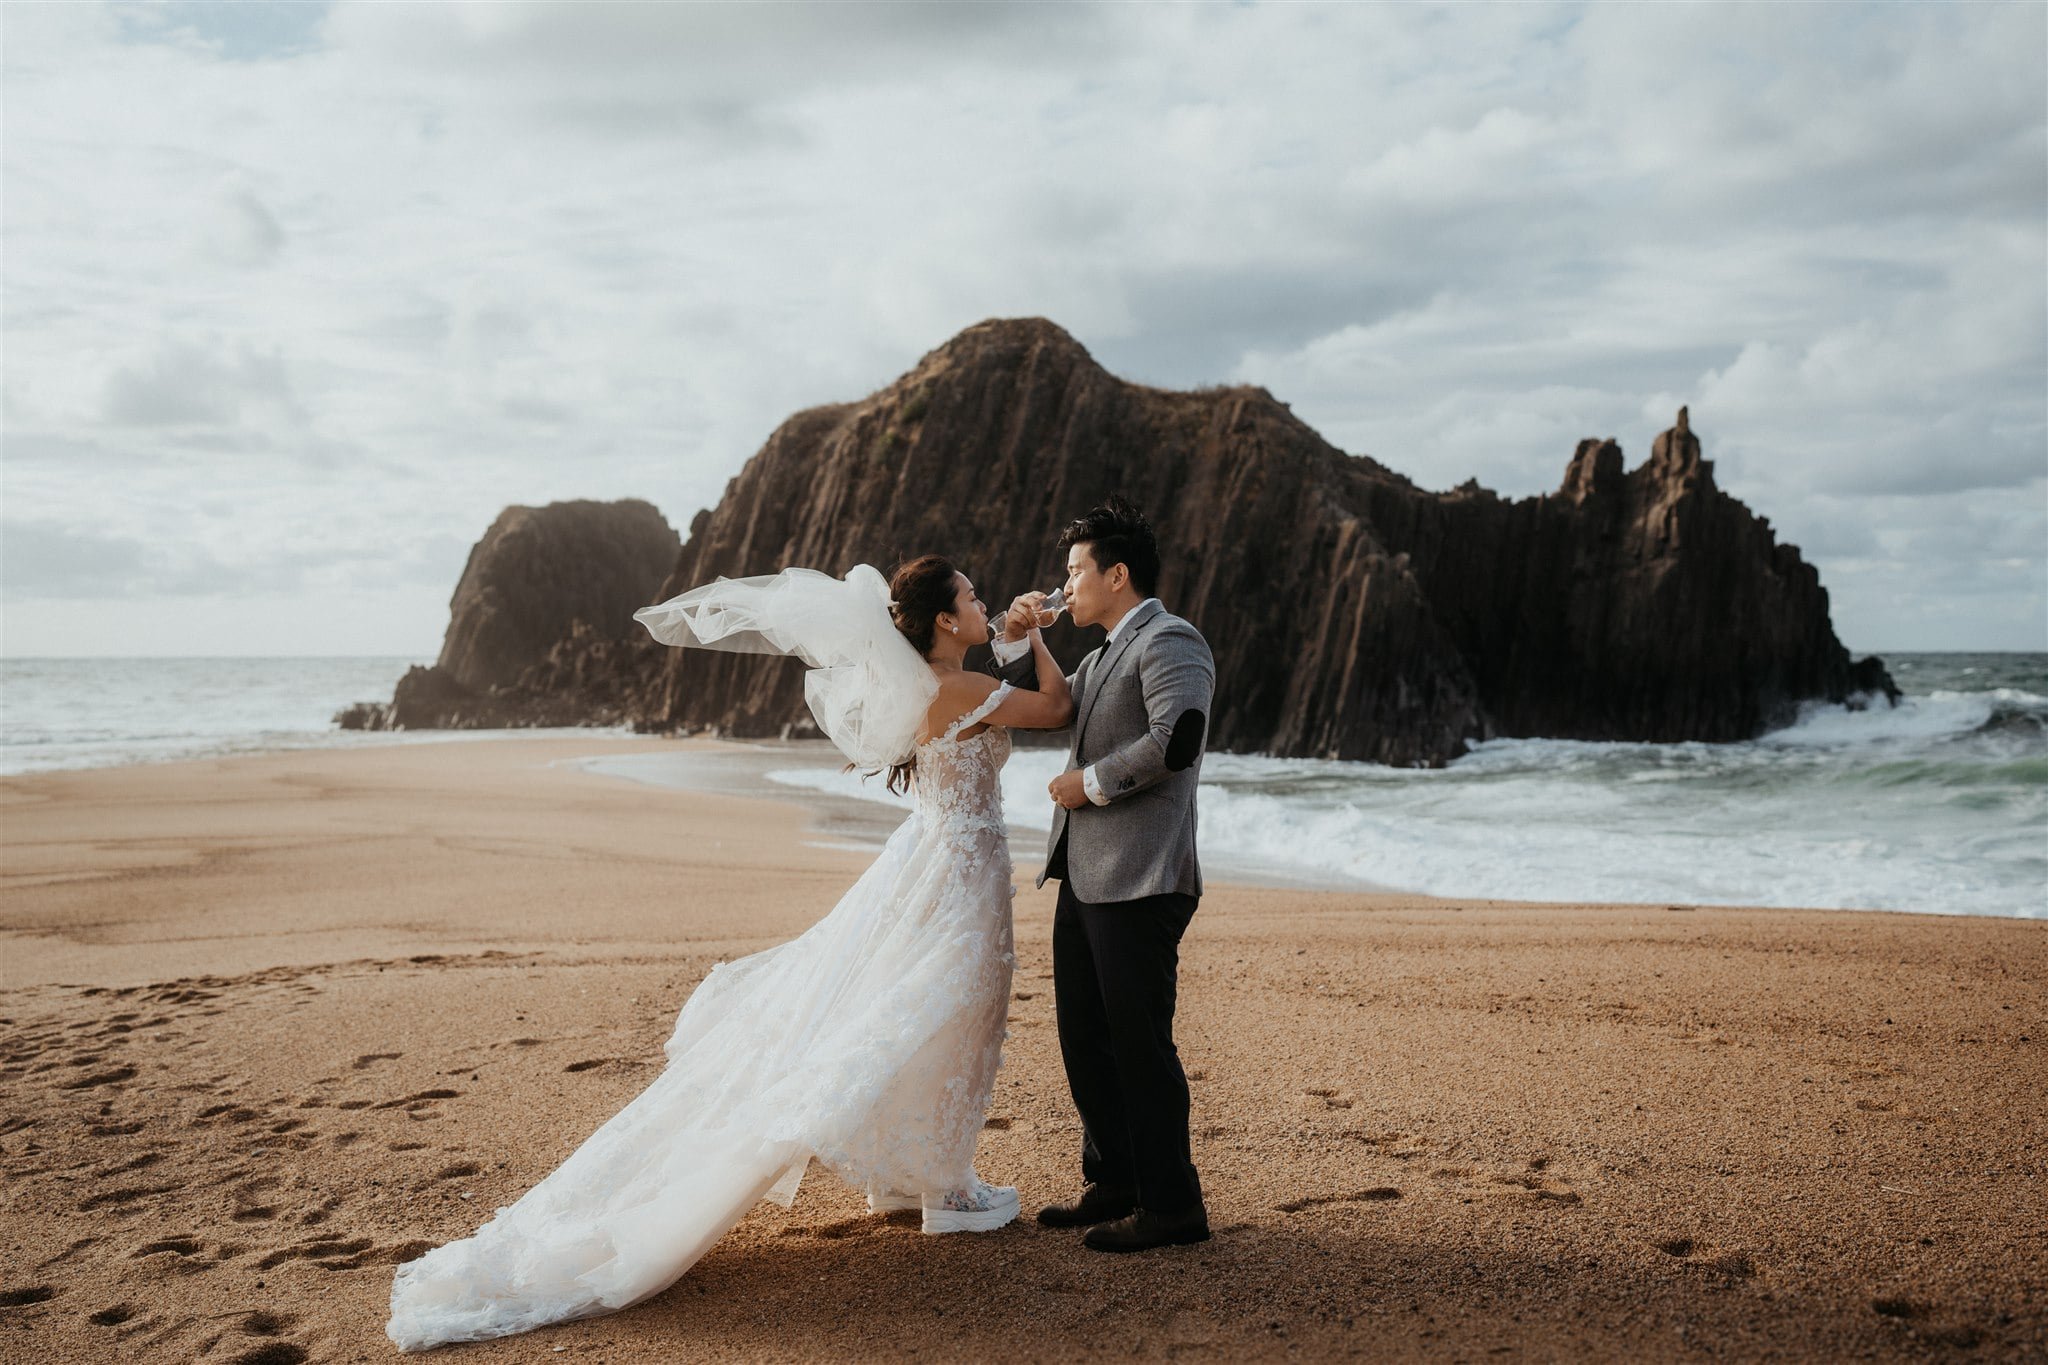 Bride and groom drink sake on the beach after their elopement ceremony